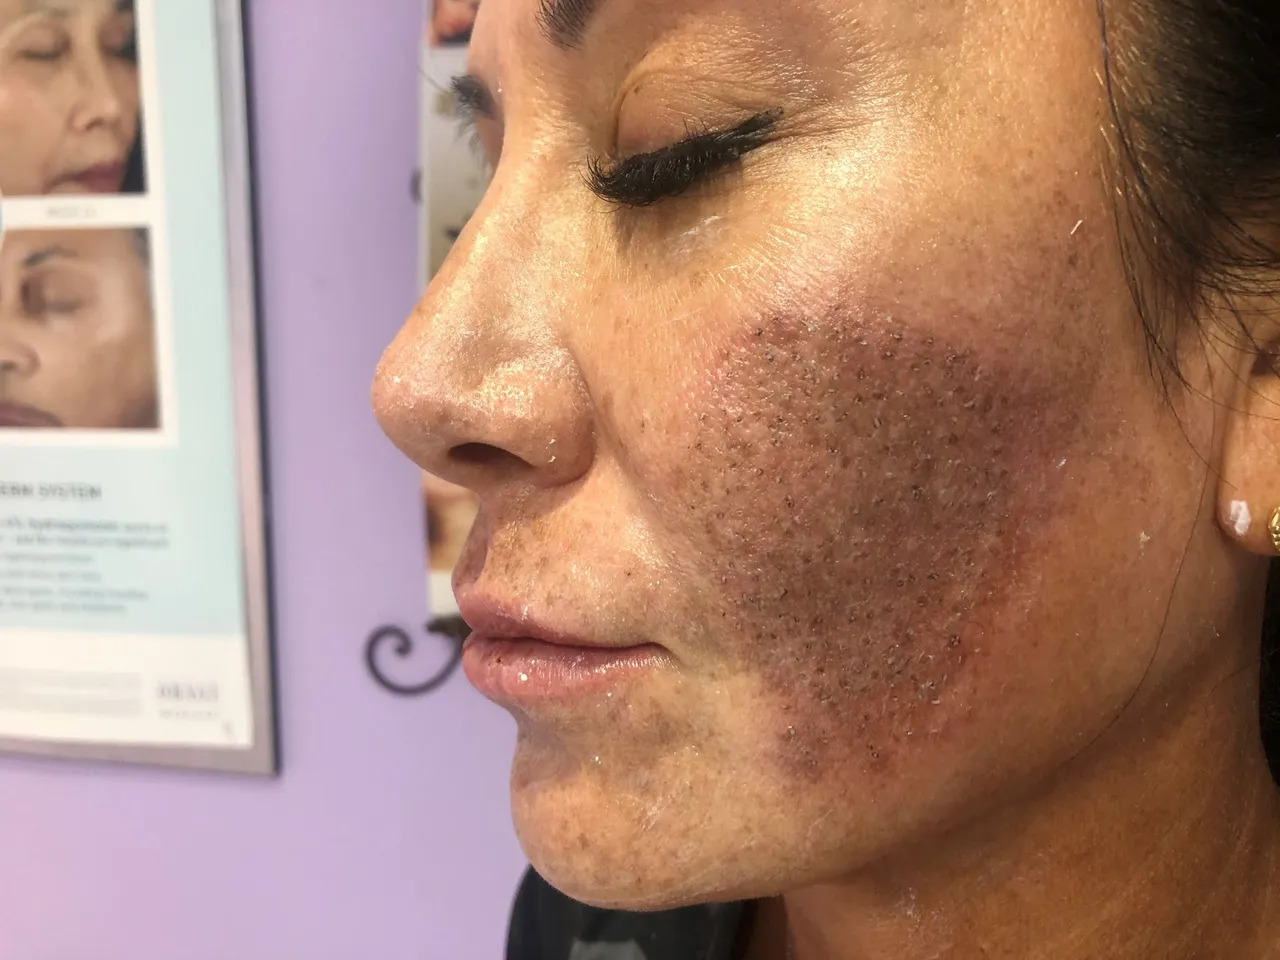 How to Get the Best Results from Microneedling